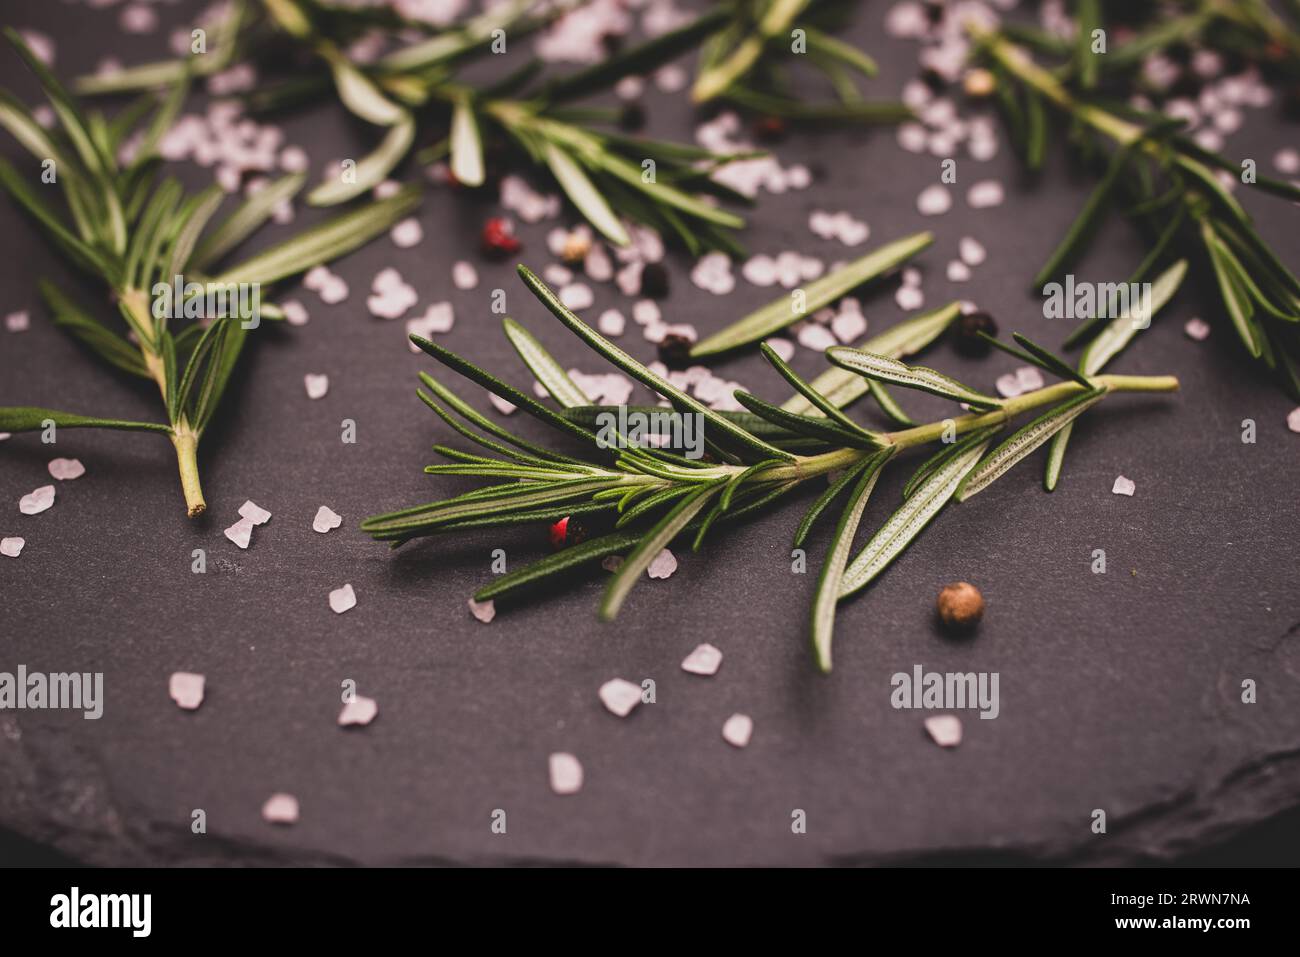 close-up bouquet of rosemary green plants on the table on a black granite plate, scattered Himalayan pink salt and black peppercorns Stock Photo